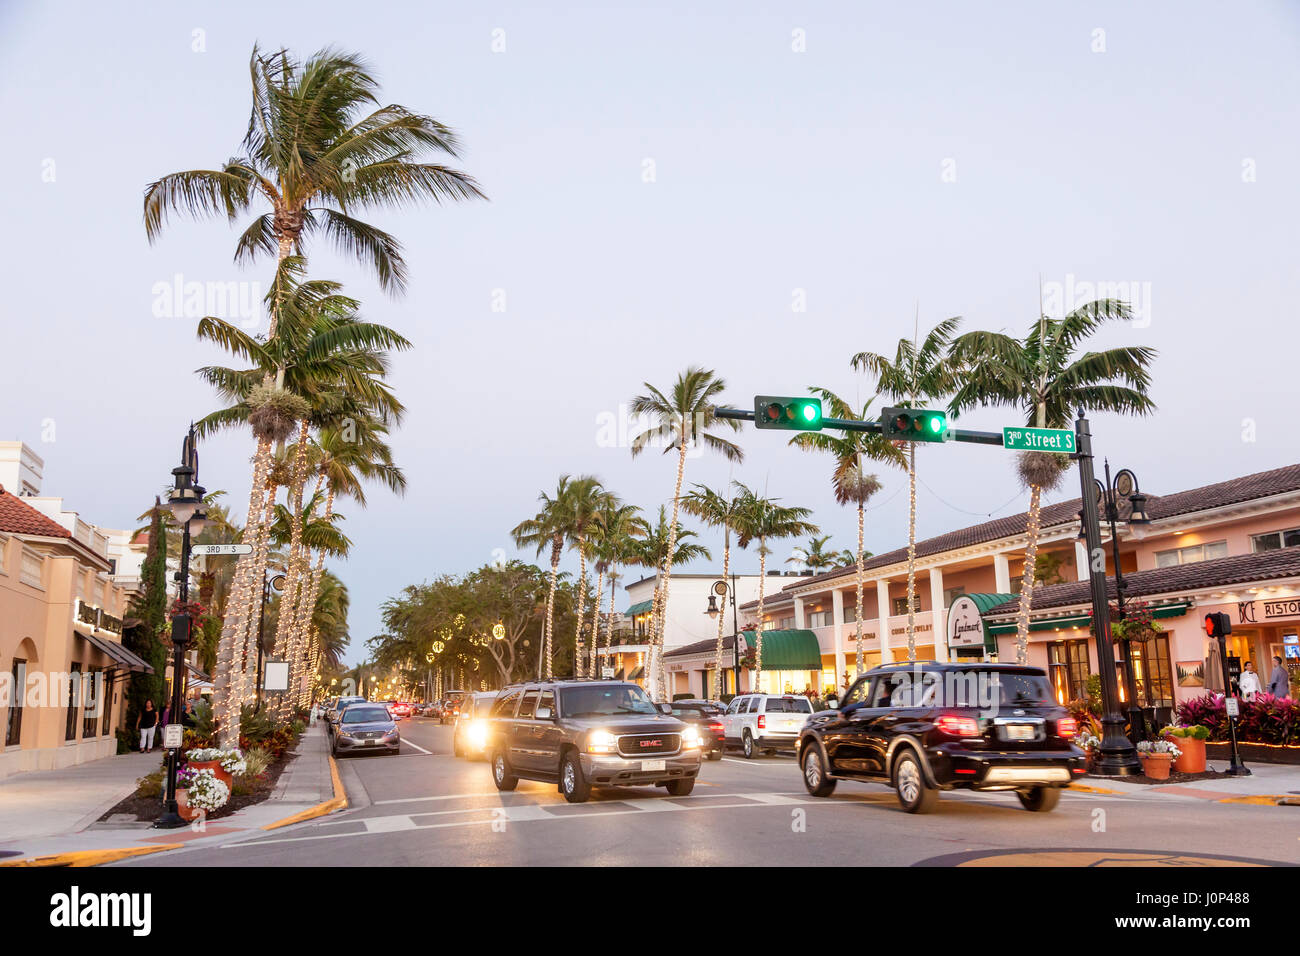 Naples, Fl, USA - March 21, 2017: Street with illuminated palm trees in the city of Naples. Florida, United States Stock Photo